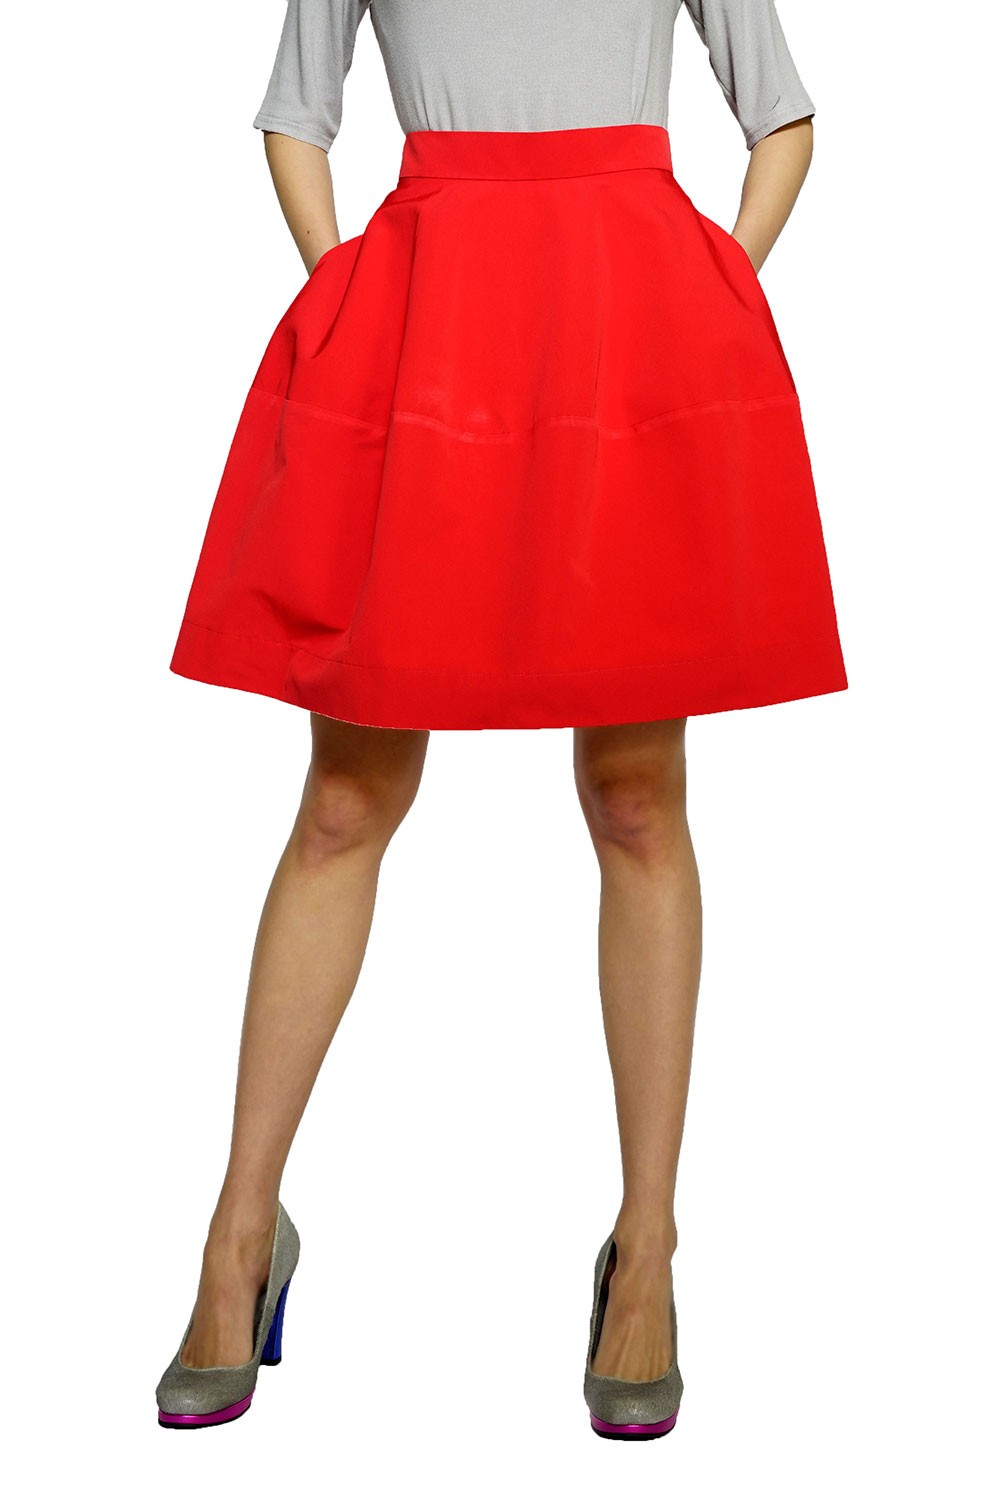 Red closed skirt